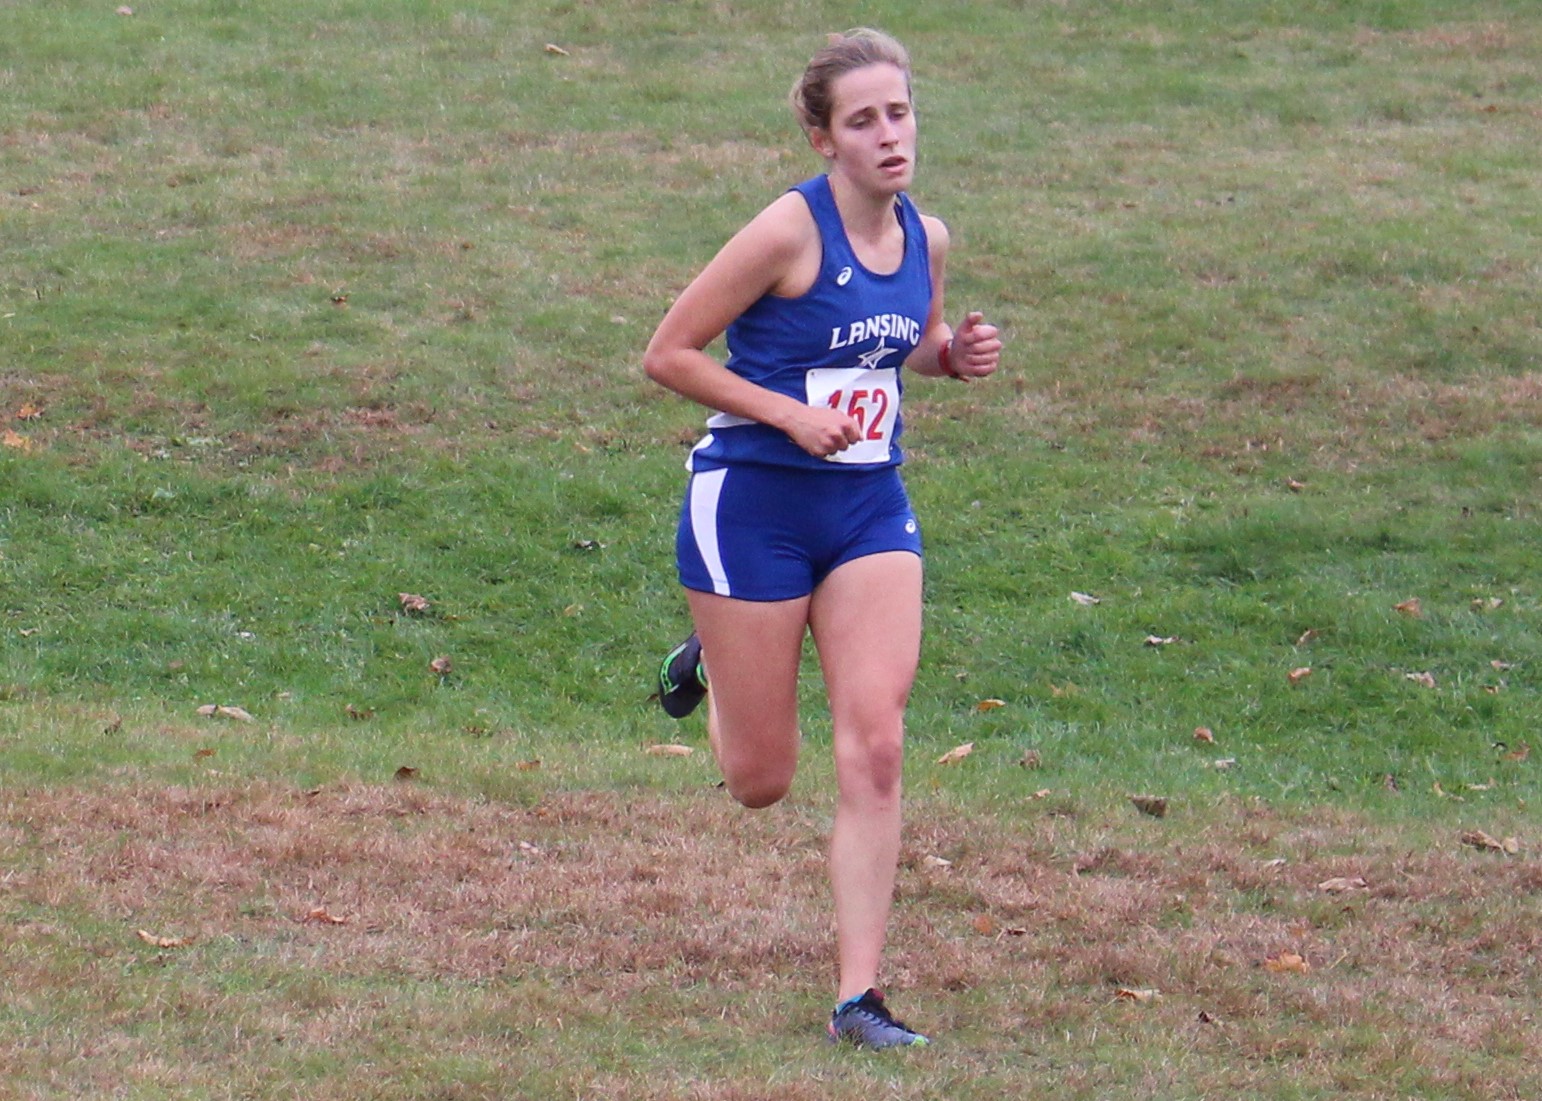 Claudia Baryo cruises to victory in the NJCAA Region XII Division I women's cross country championship